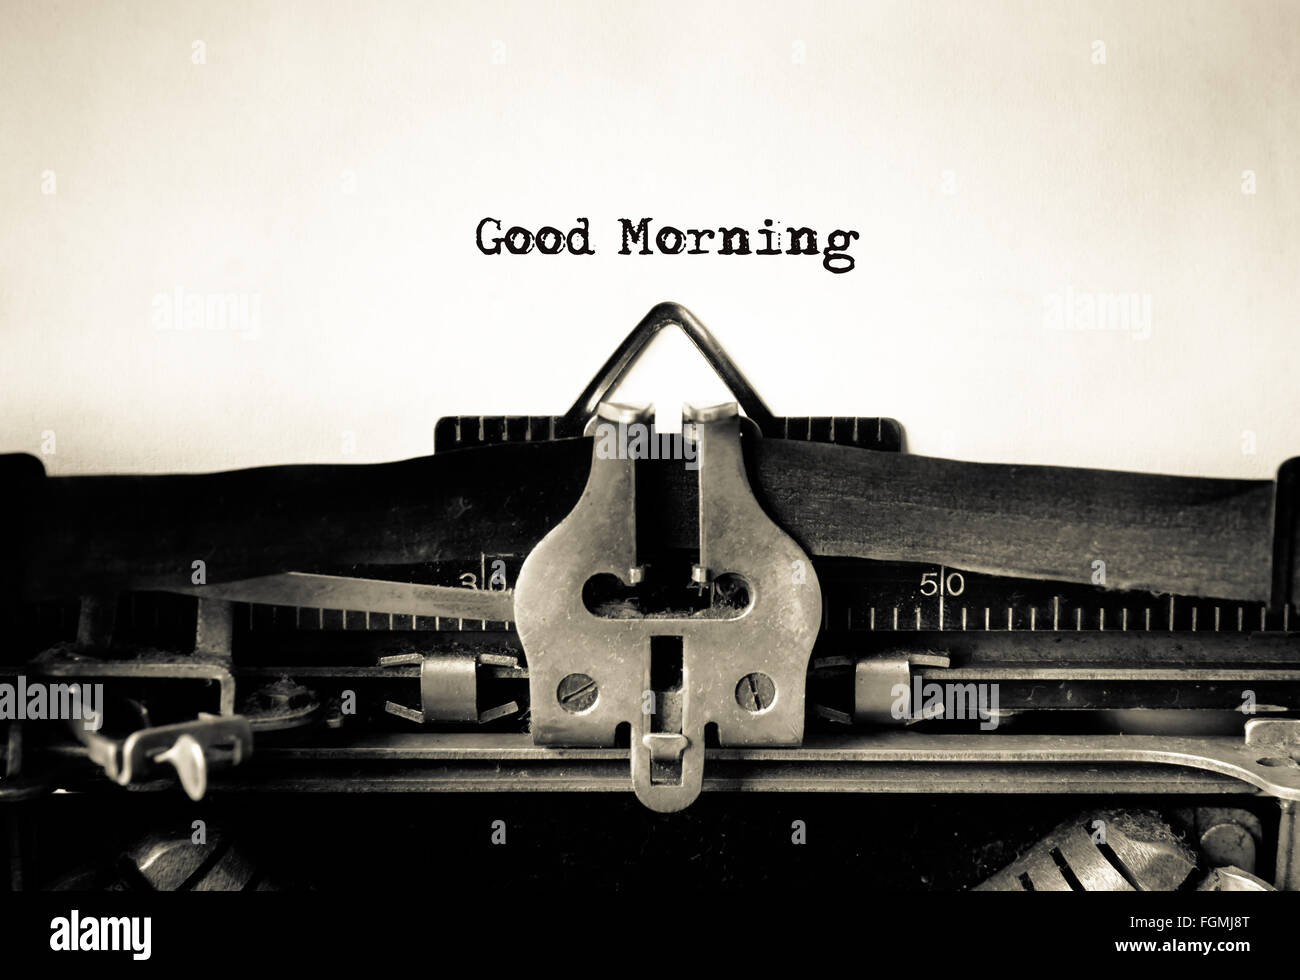 Good Morning message typed on a vintage typewriter Stock Photo